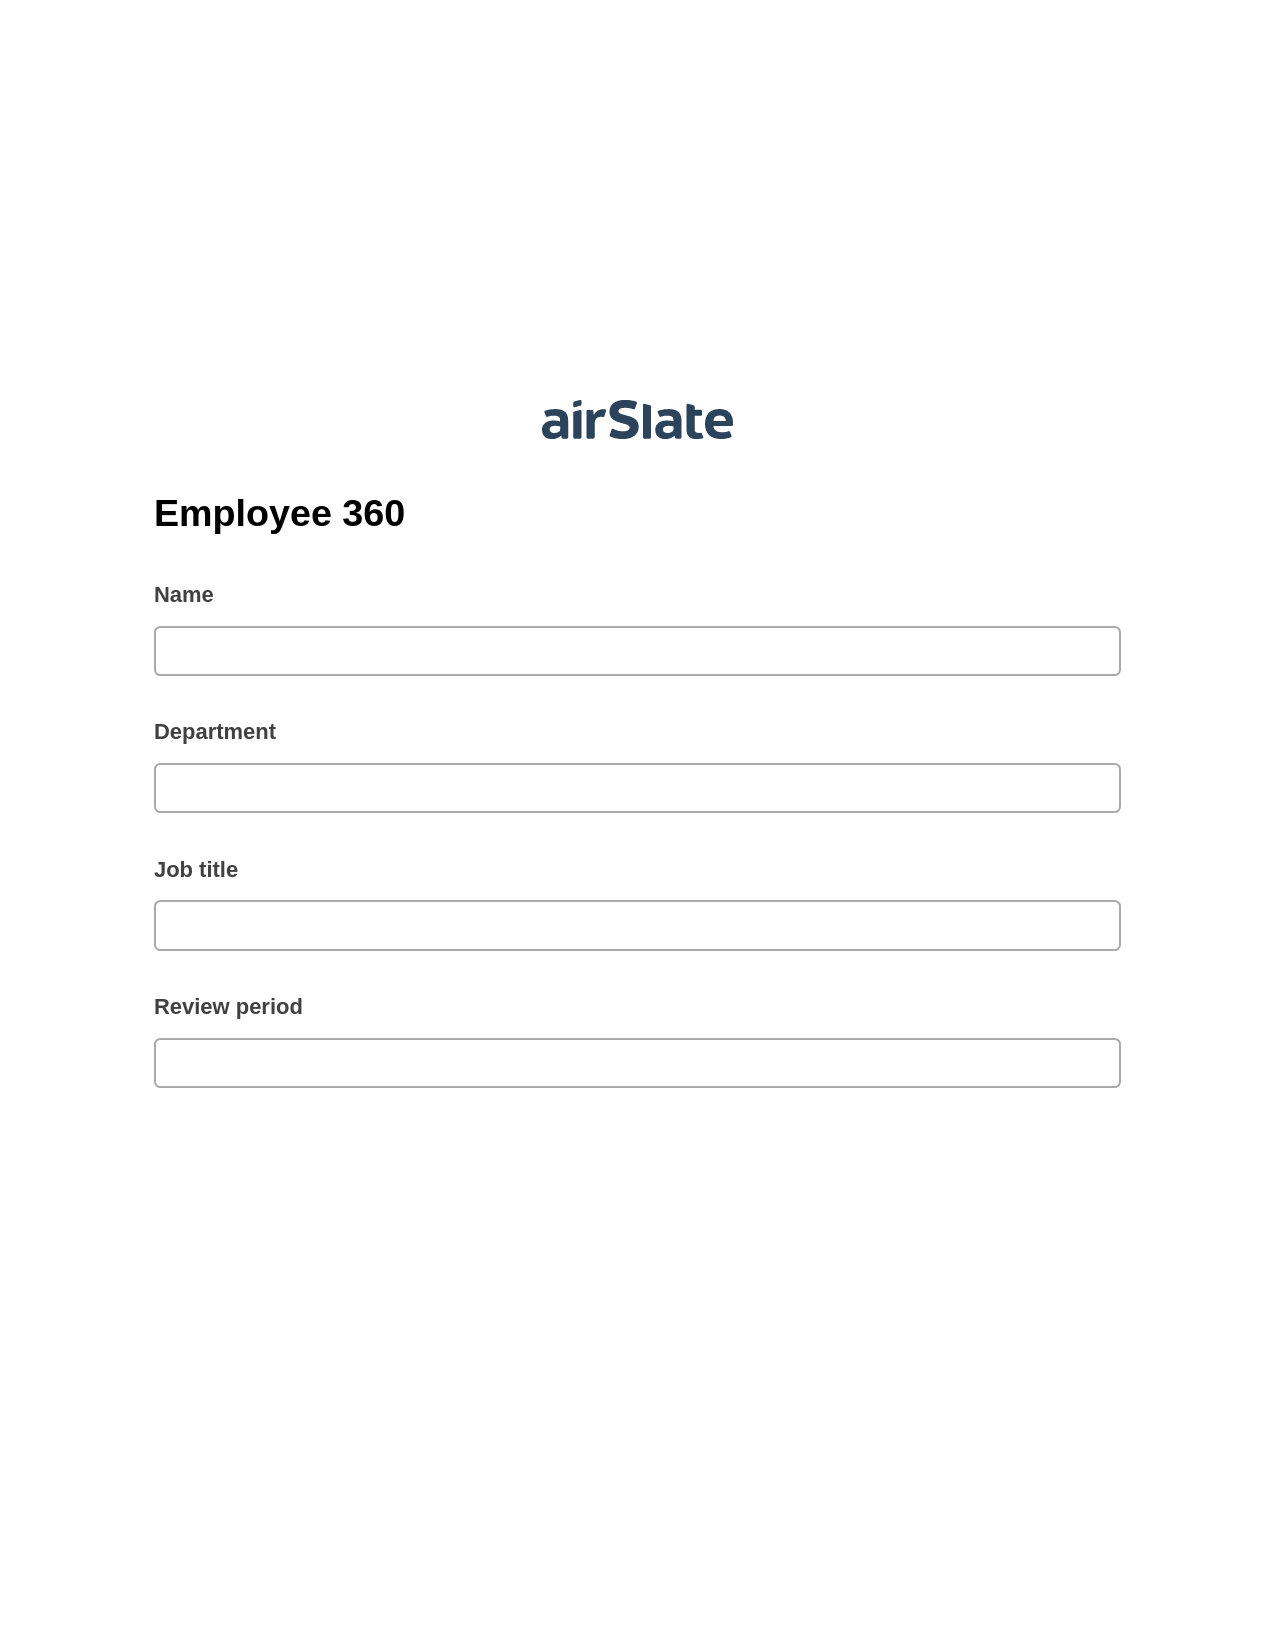 Employee 360 Pre-fill Dropdowns from CSV file Bot, Roles Reminder Bot, Export to Excel 365 Bot